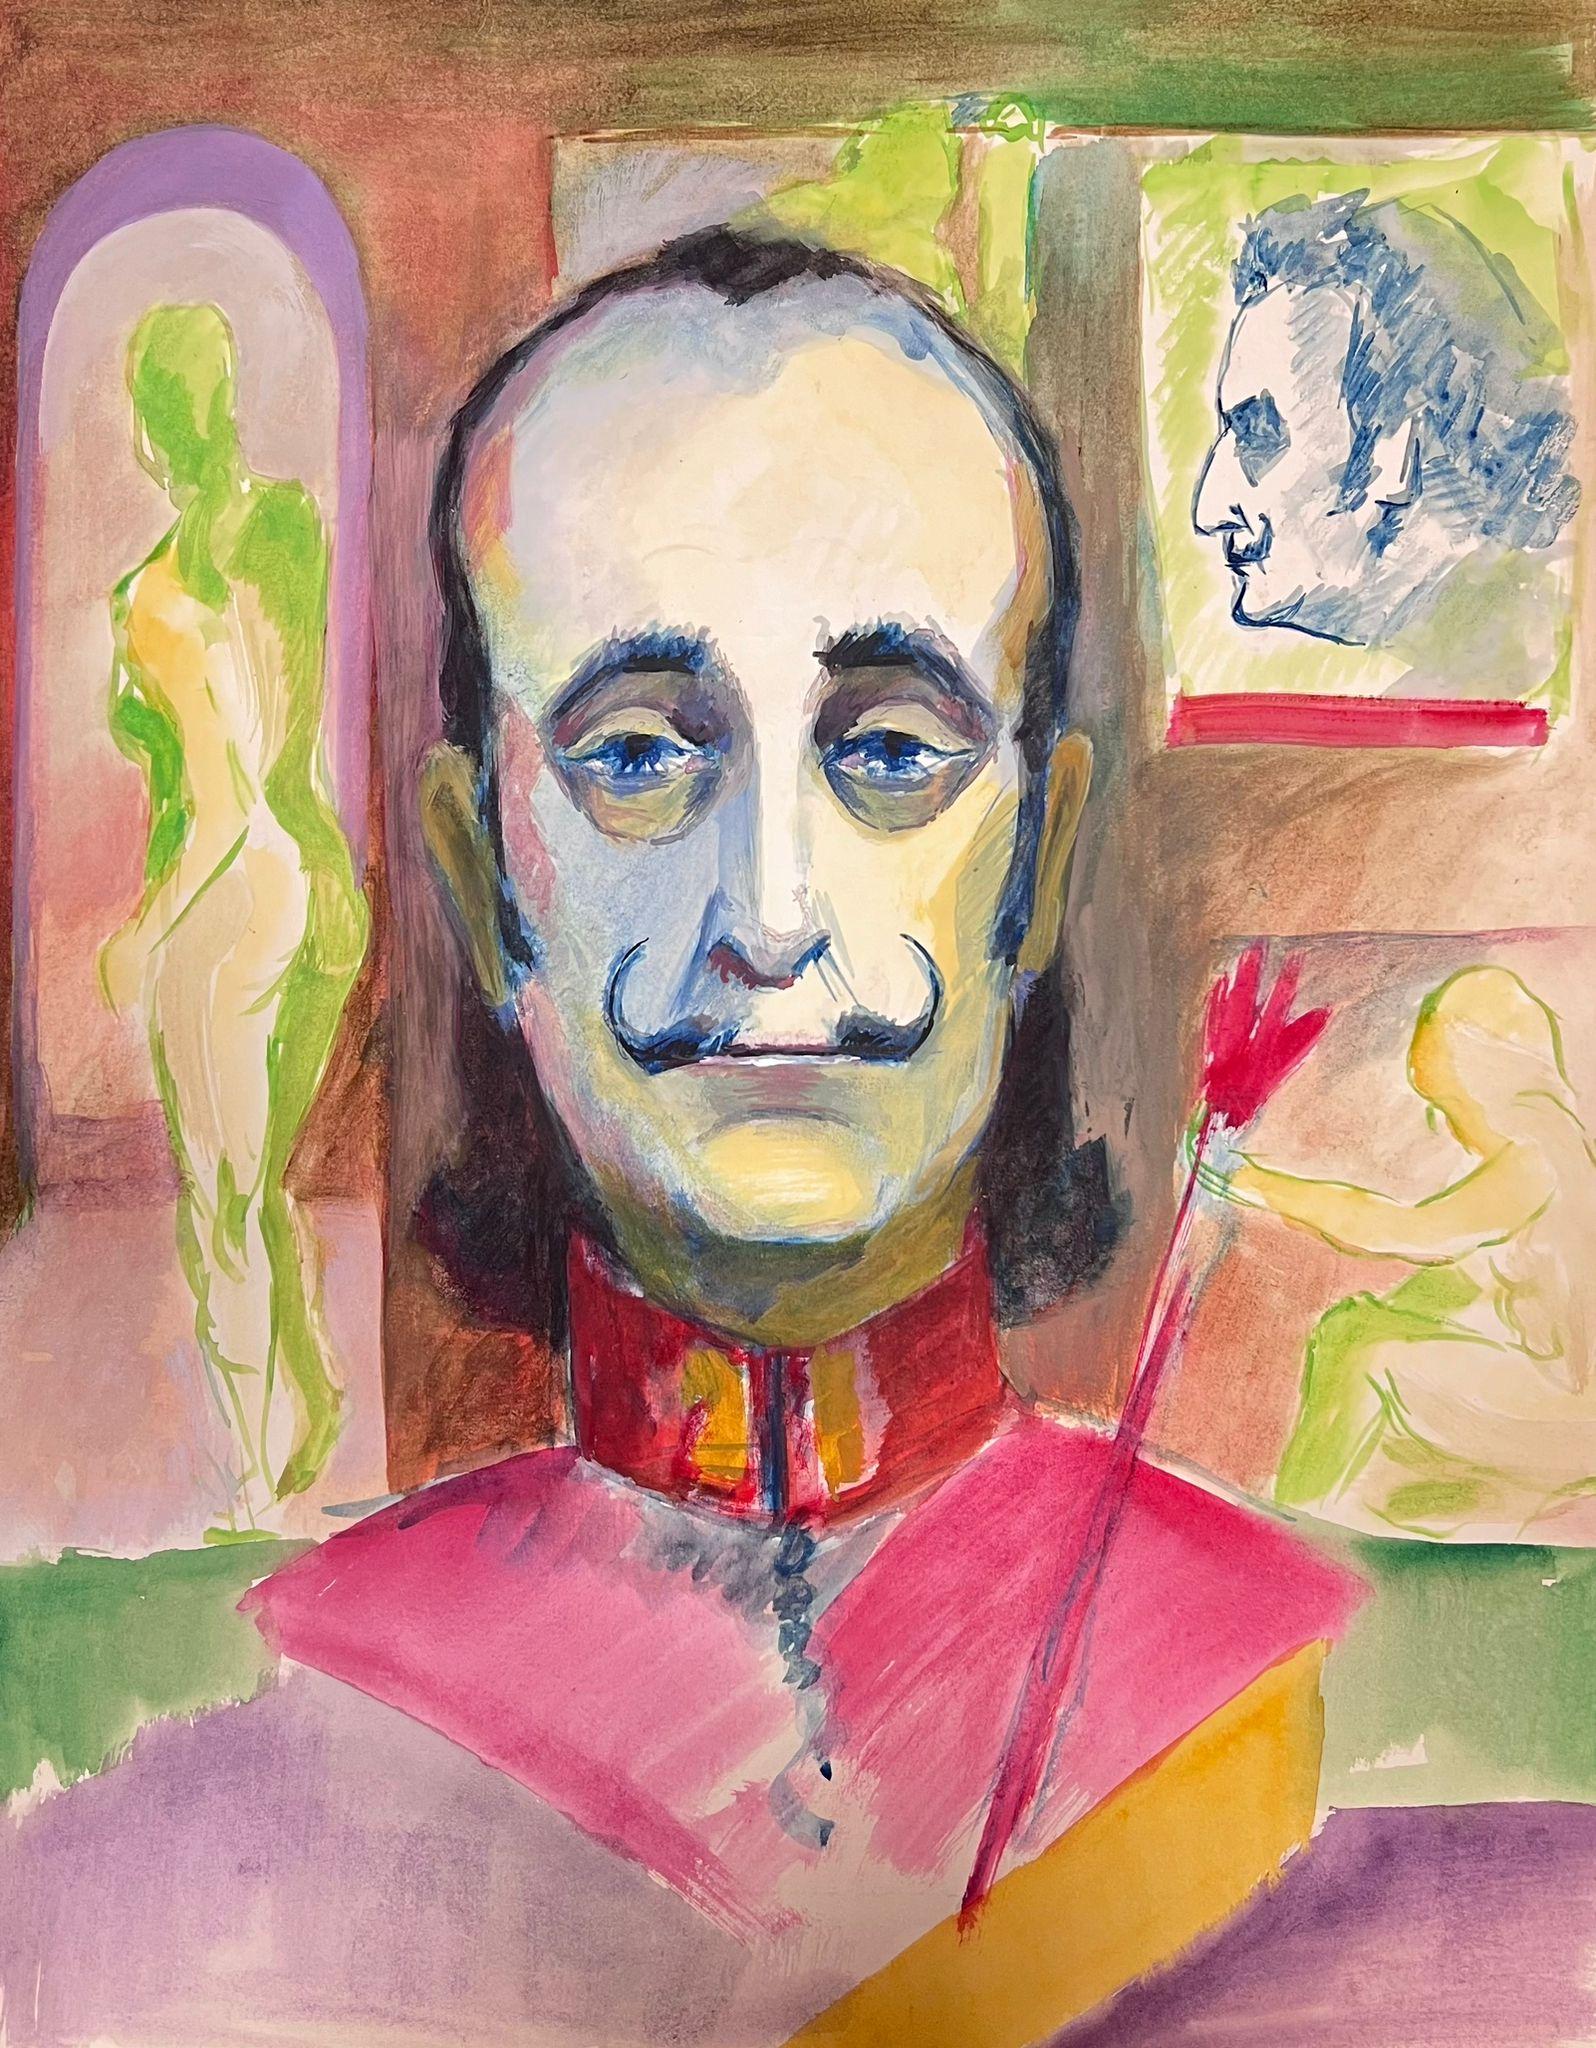 French Expressionist Portrait
by Guy Nicod
(French 1923 - 2021)
watercolour on artist paper, unframed
painting : 19.5 x 15.5 inches
provenance: artists estate, France
condition: very good and sound condition